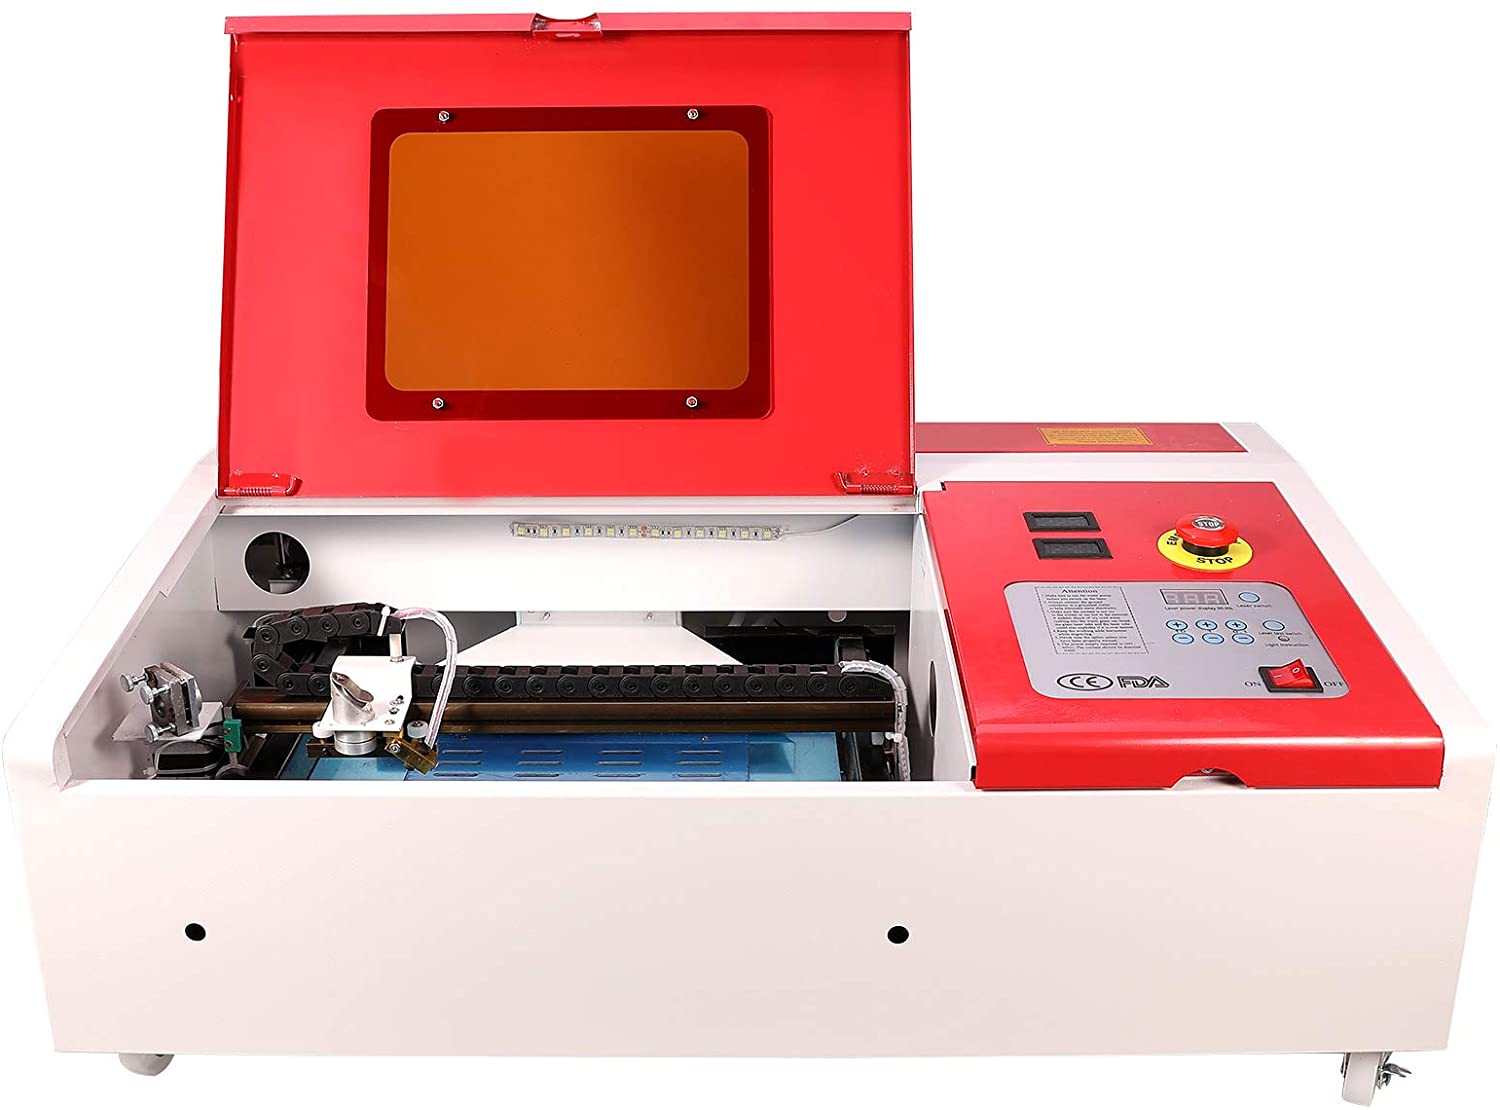 OMTech 40W CO2 Laser Engraving Cutting Machine